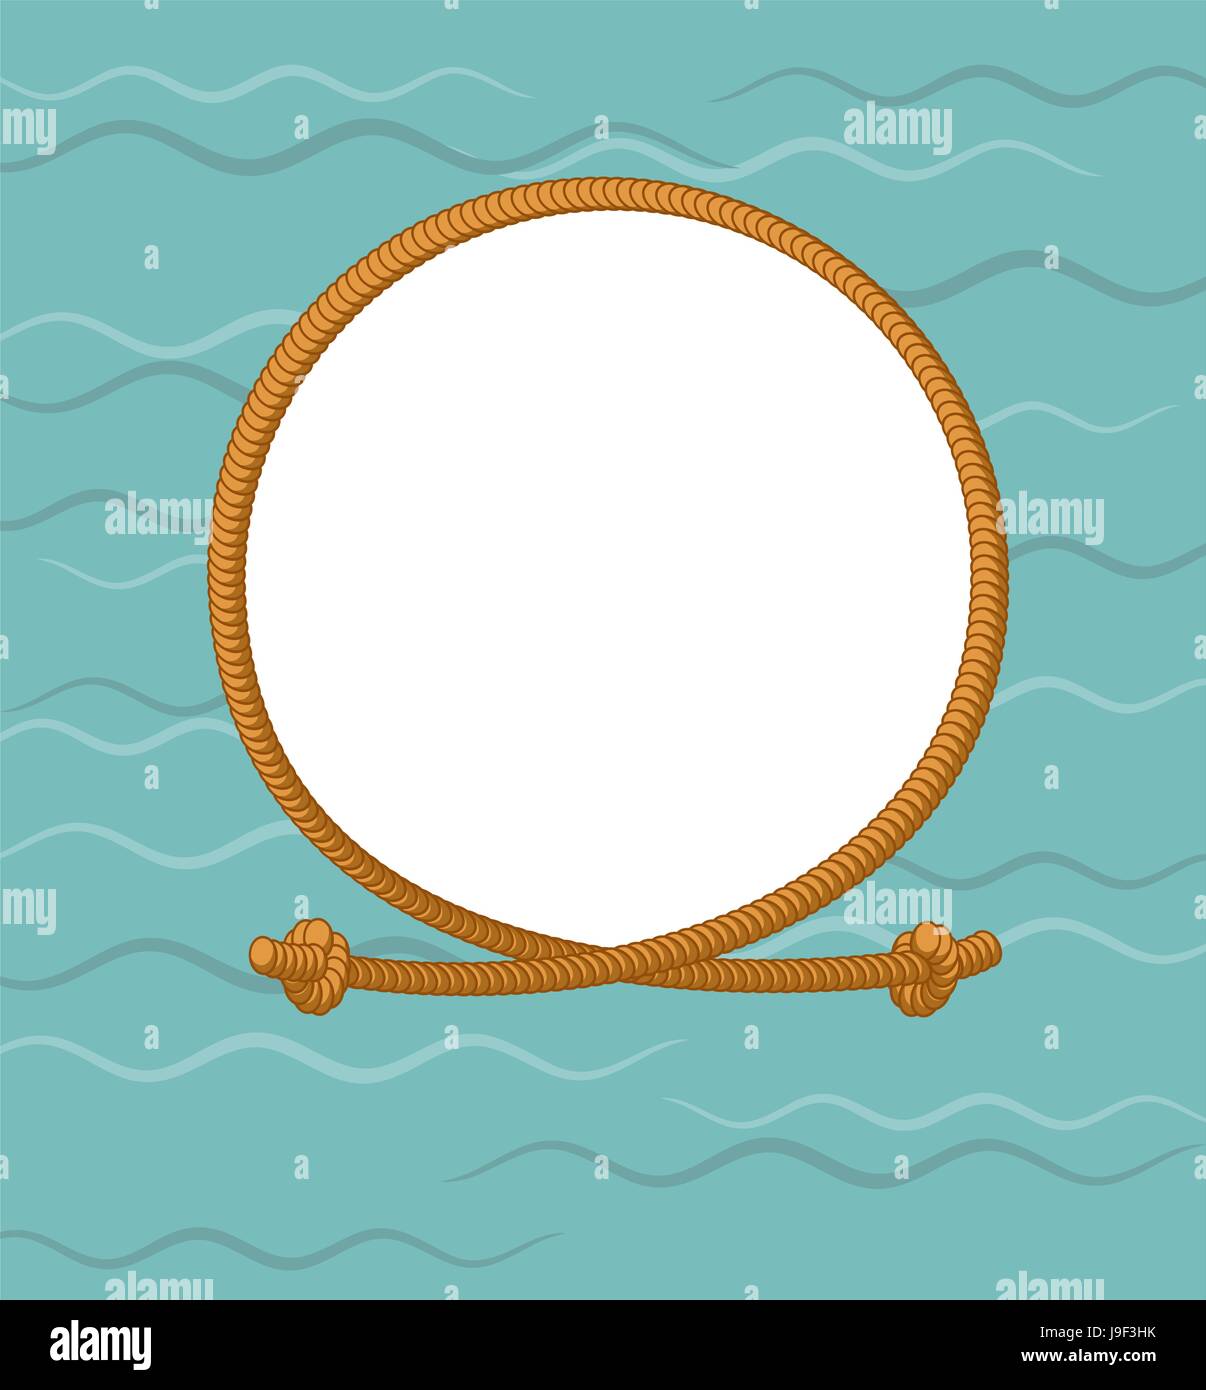 Maritime round frame with rope. thick rope and knots. Knot-photo frame Stock Vector